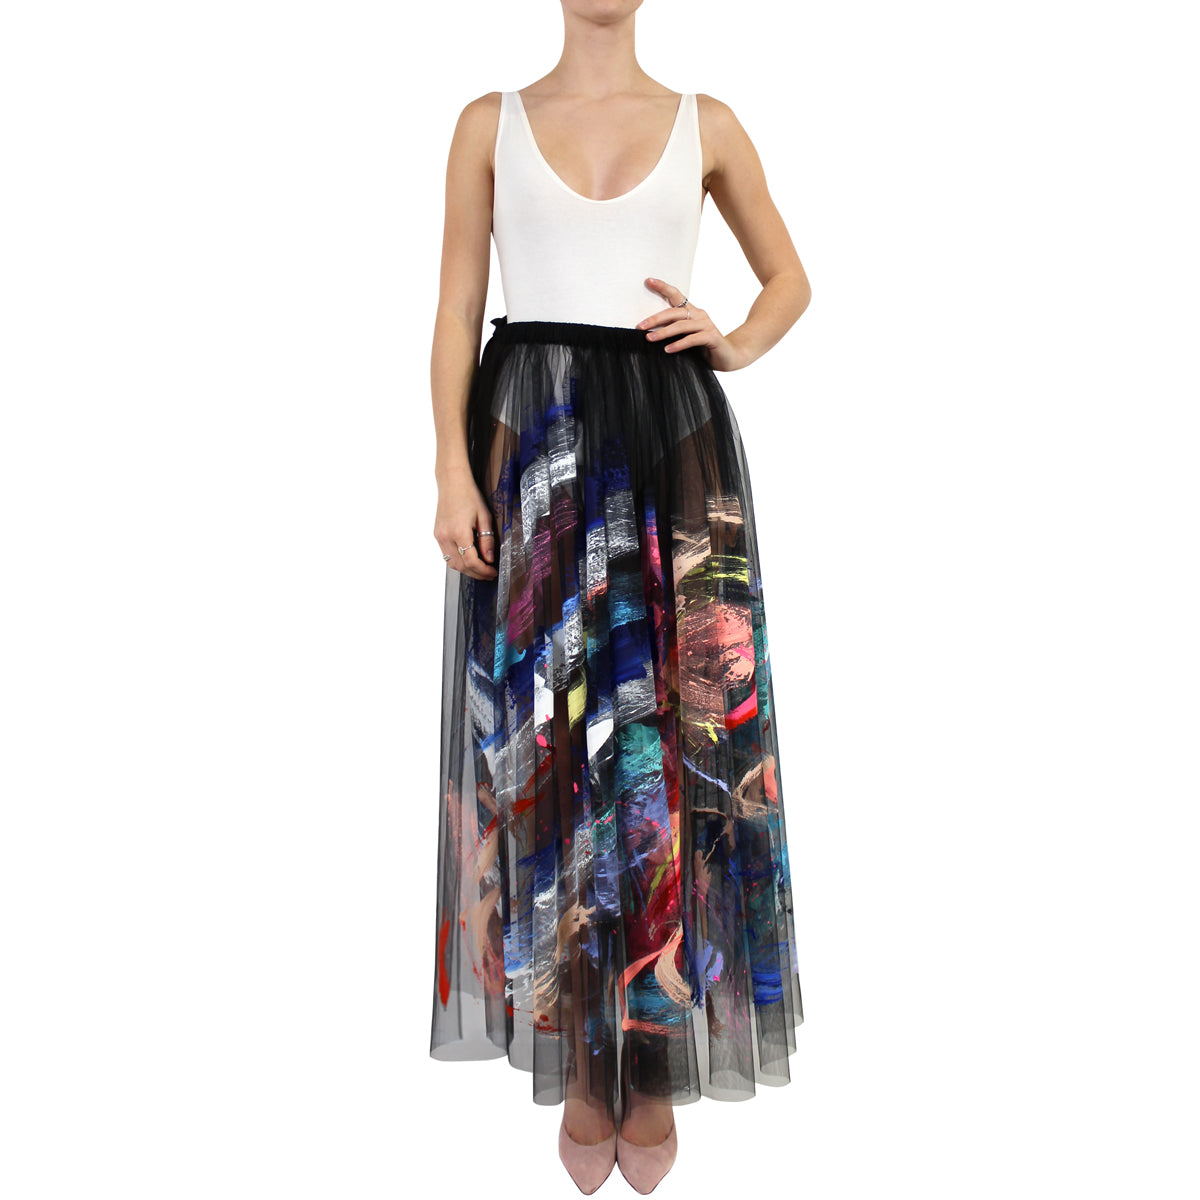 bowie | tulle skirt - Tiff Manuell